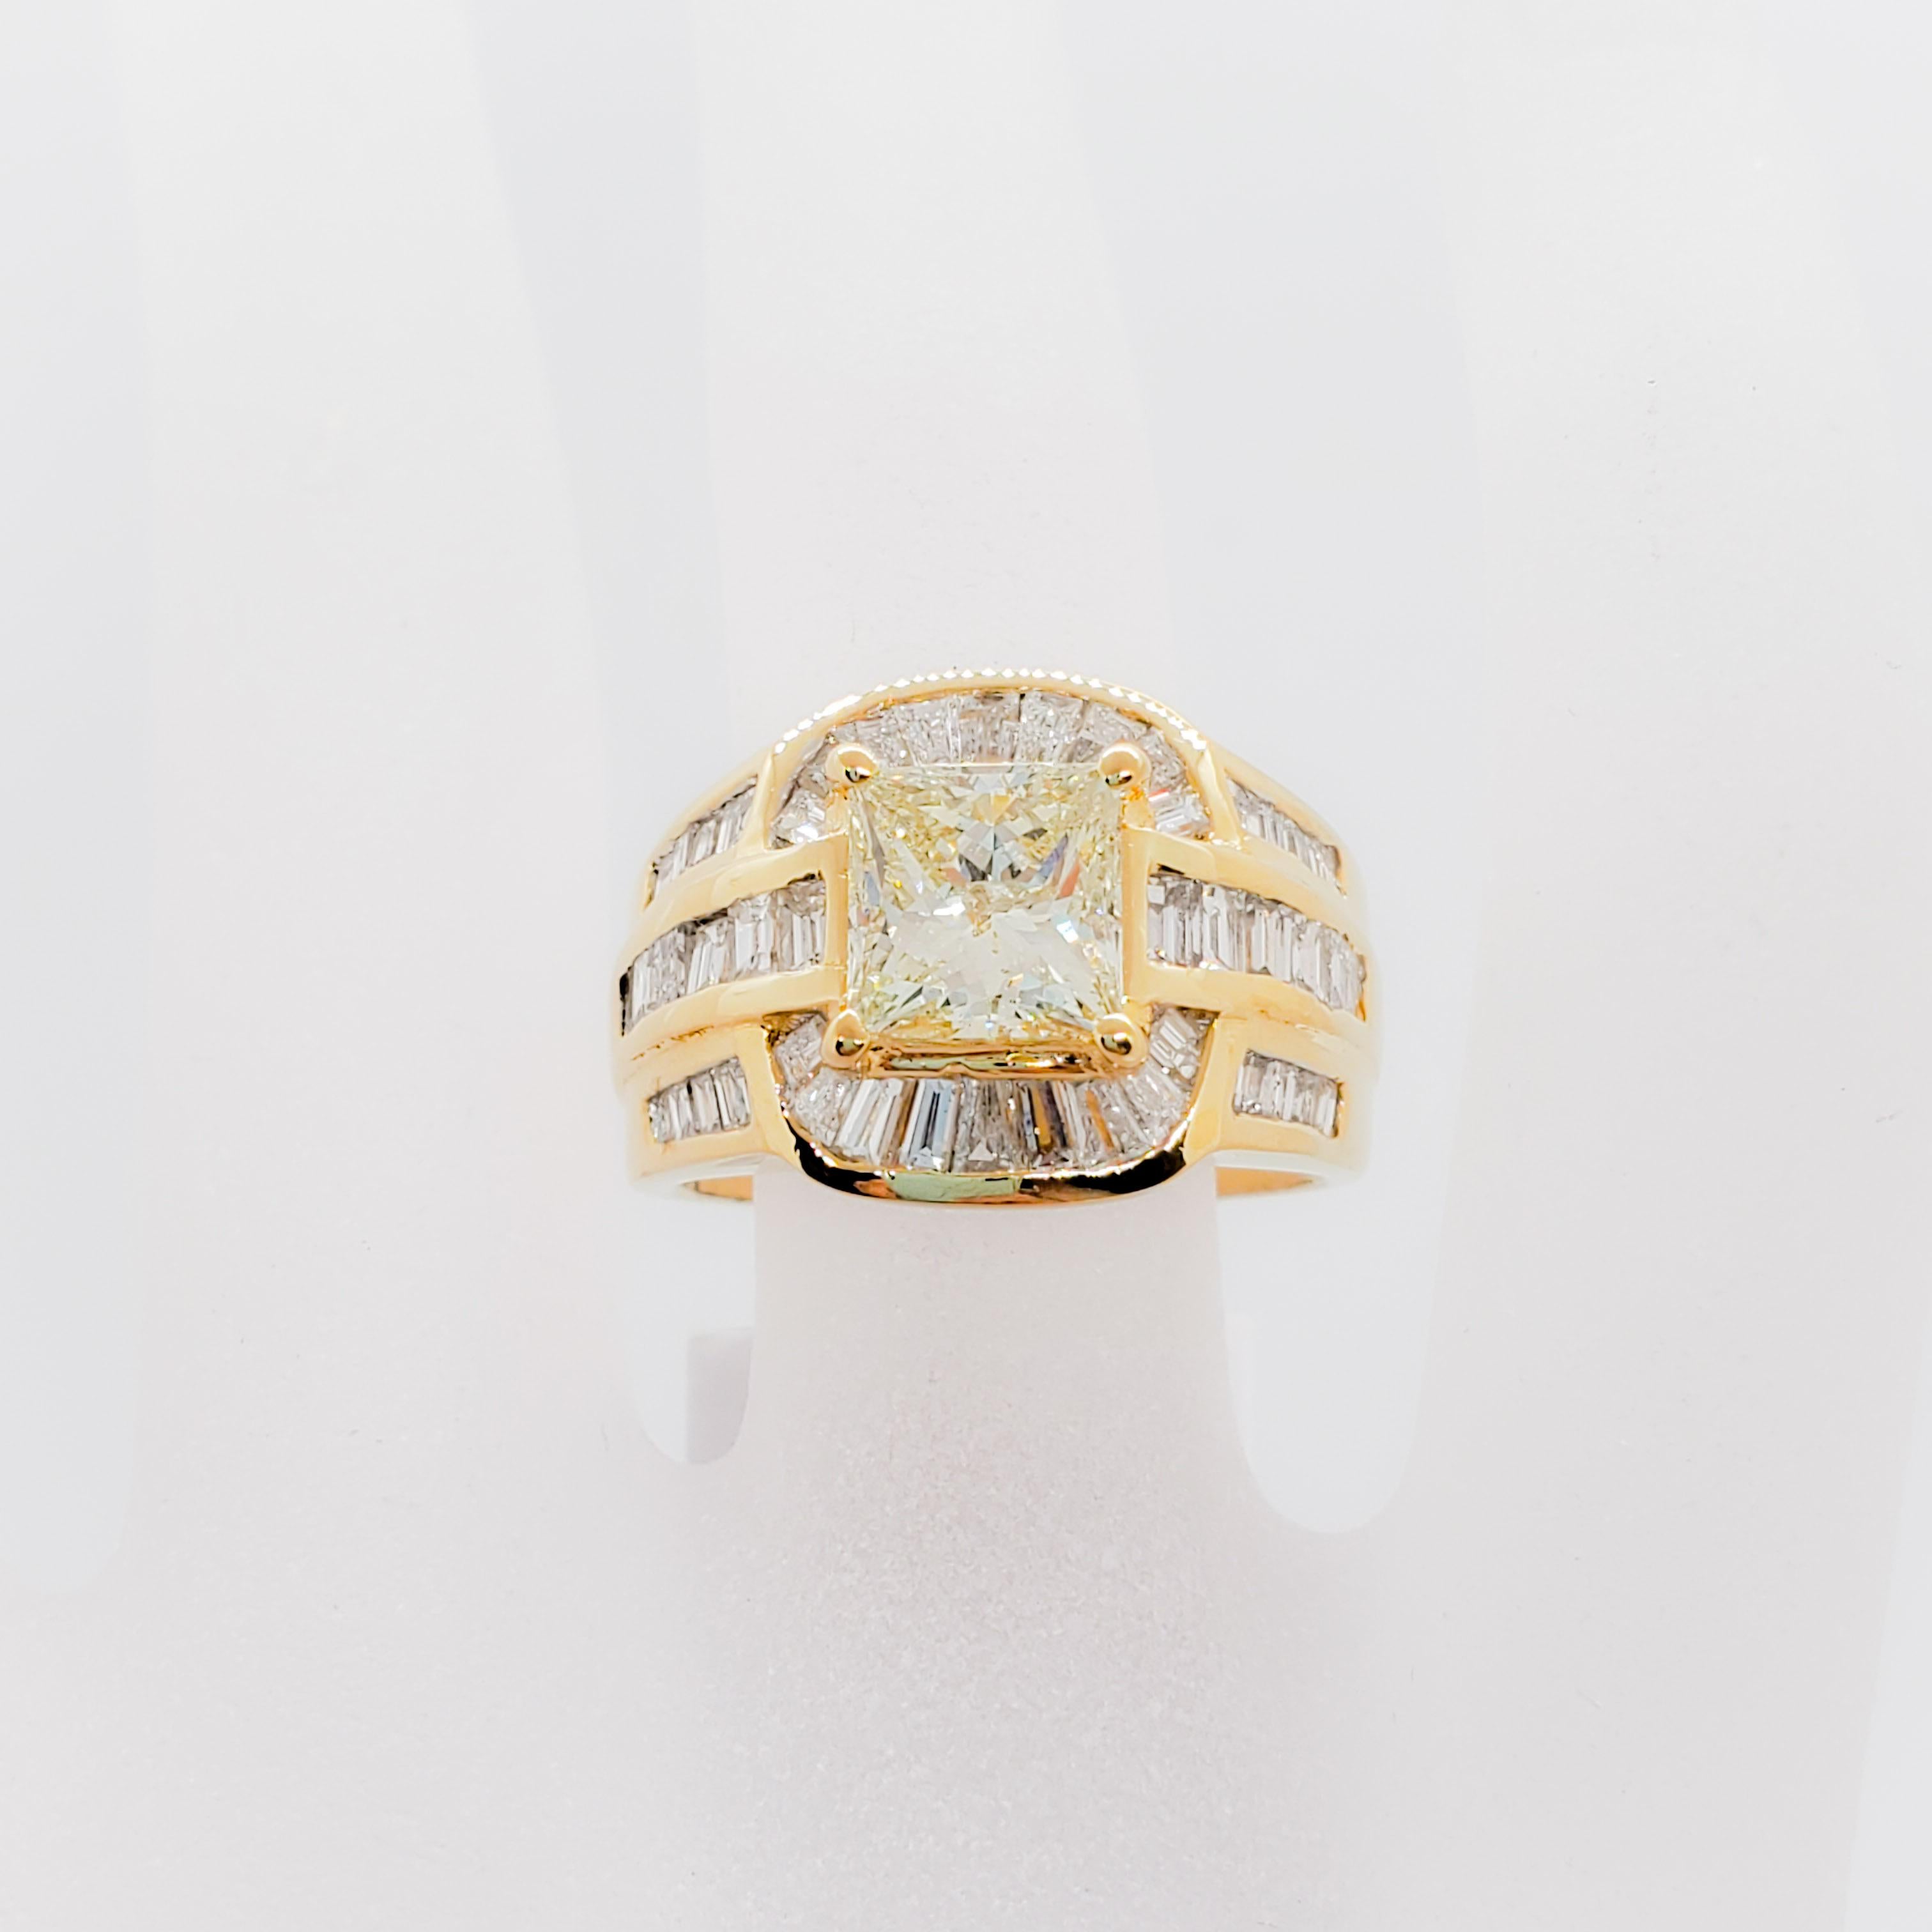 This estate ring features 2.09 ct. of good quality diamond princess cut and 1.88 ct. white diamond baguettes in a beautiful handmade 18k yellow gold setting.  Ring size is 6.25.  Perfect to wear everyday or for a special occasion.  Mint condition.